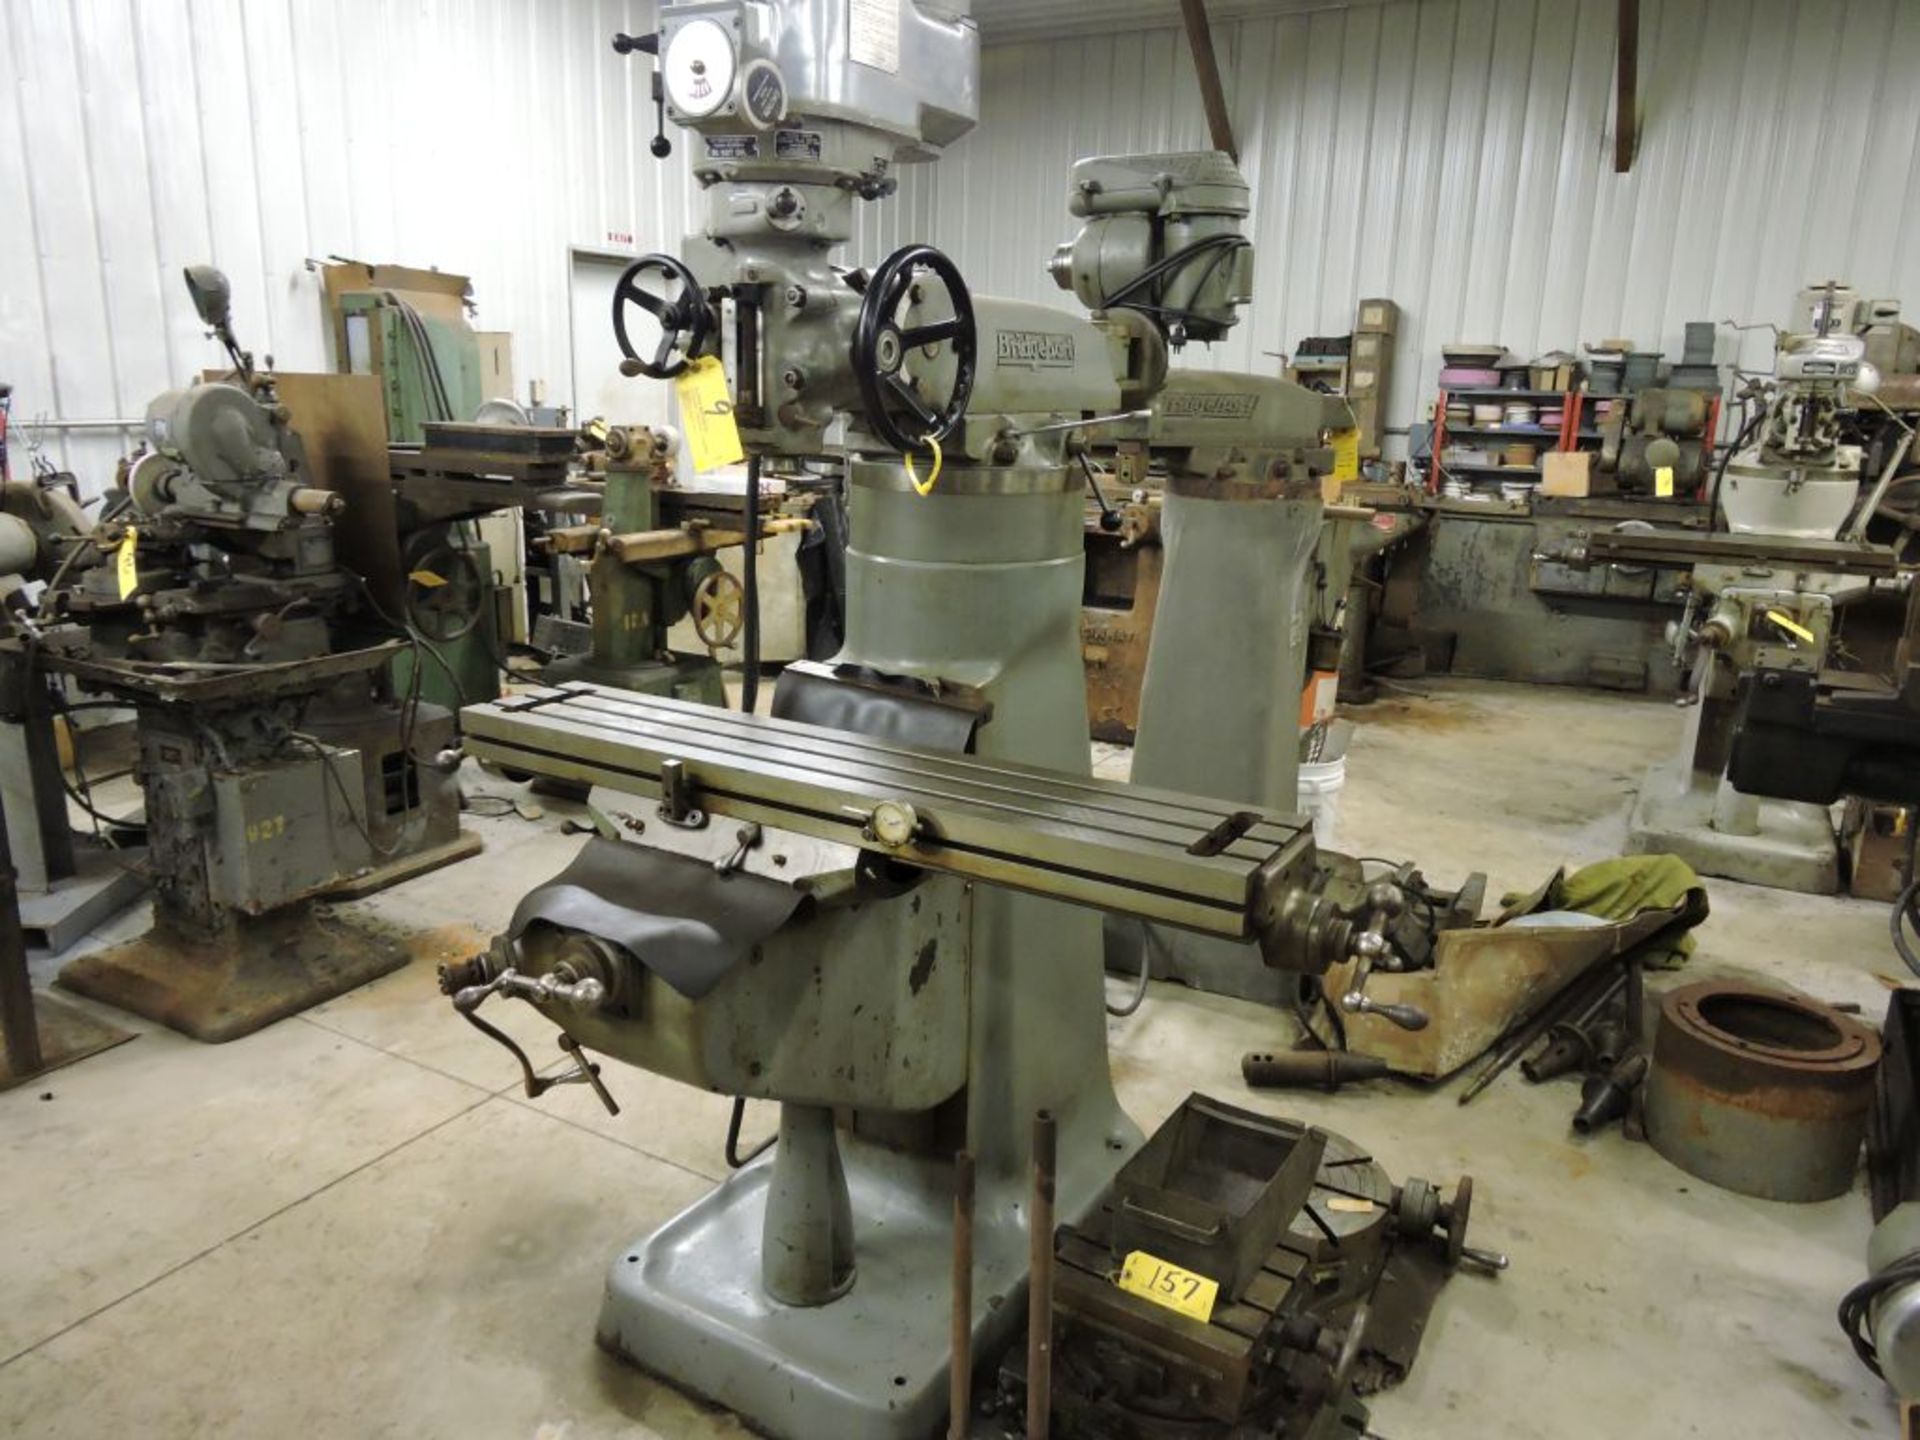 Bridgeport mill, model 12-BR, sn 83978, 9" x 48" bed, manual (not down power), shaping attachment. - Image 12 of 15